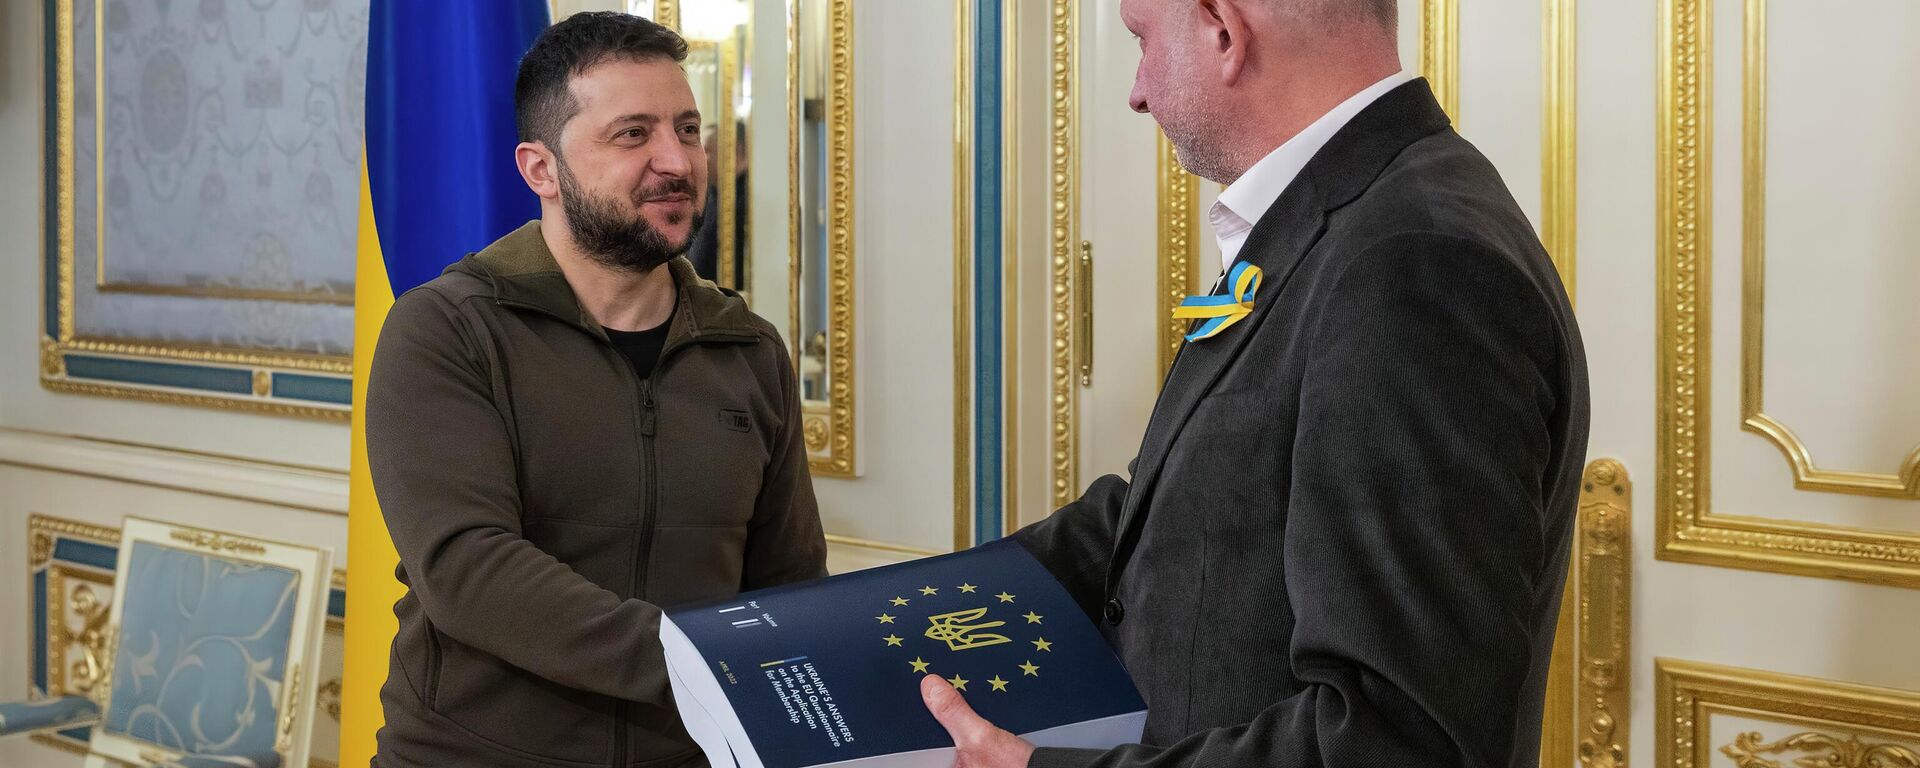 In this image provided by the Ukrainian Presidential Press Office, Ukrainian President Volodymyr Zelensky presents Matti Maasikas, head of the Delegation of the European Union to Ukraine, with the two-volume set of Ukraine's answers to the European Union questionnaire, the first step in his campaign to obtain accelerated EU membership, in Kiev, Ukraine, Monday, April 18, 2022.  - Sputnik International, 1920, 19.07.2022